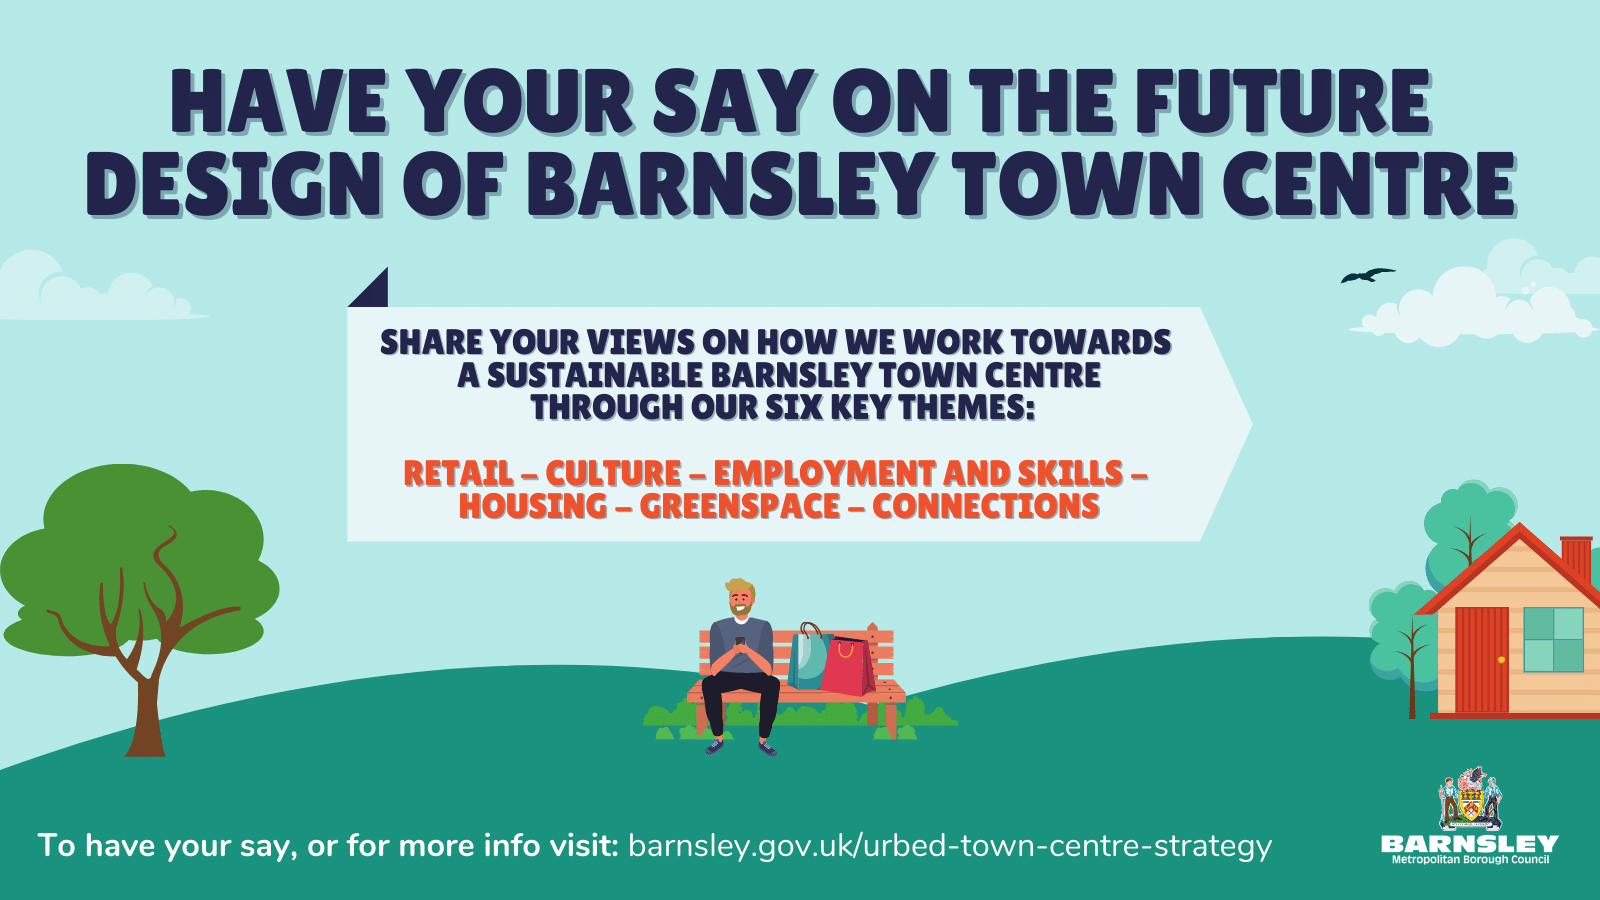 Have your say on the future design of Barnsley town centre: drawing of man sat on a bench with shopping bags, a tree and a house.